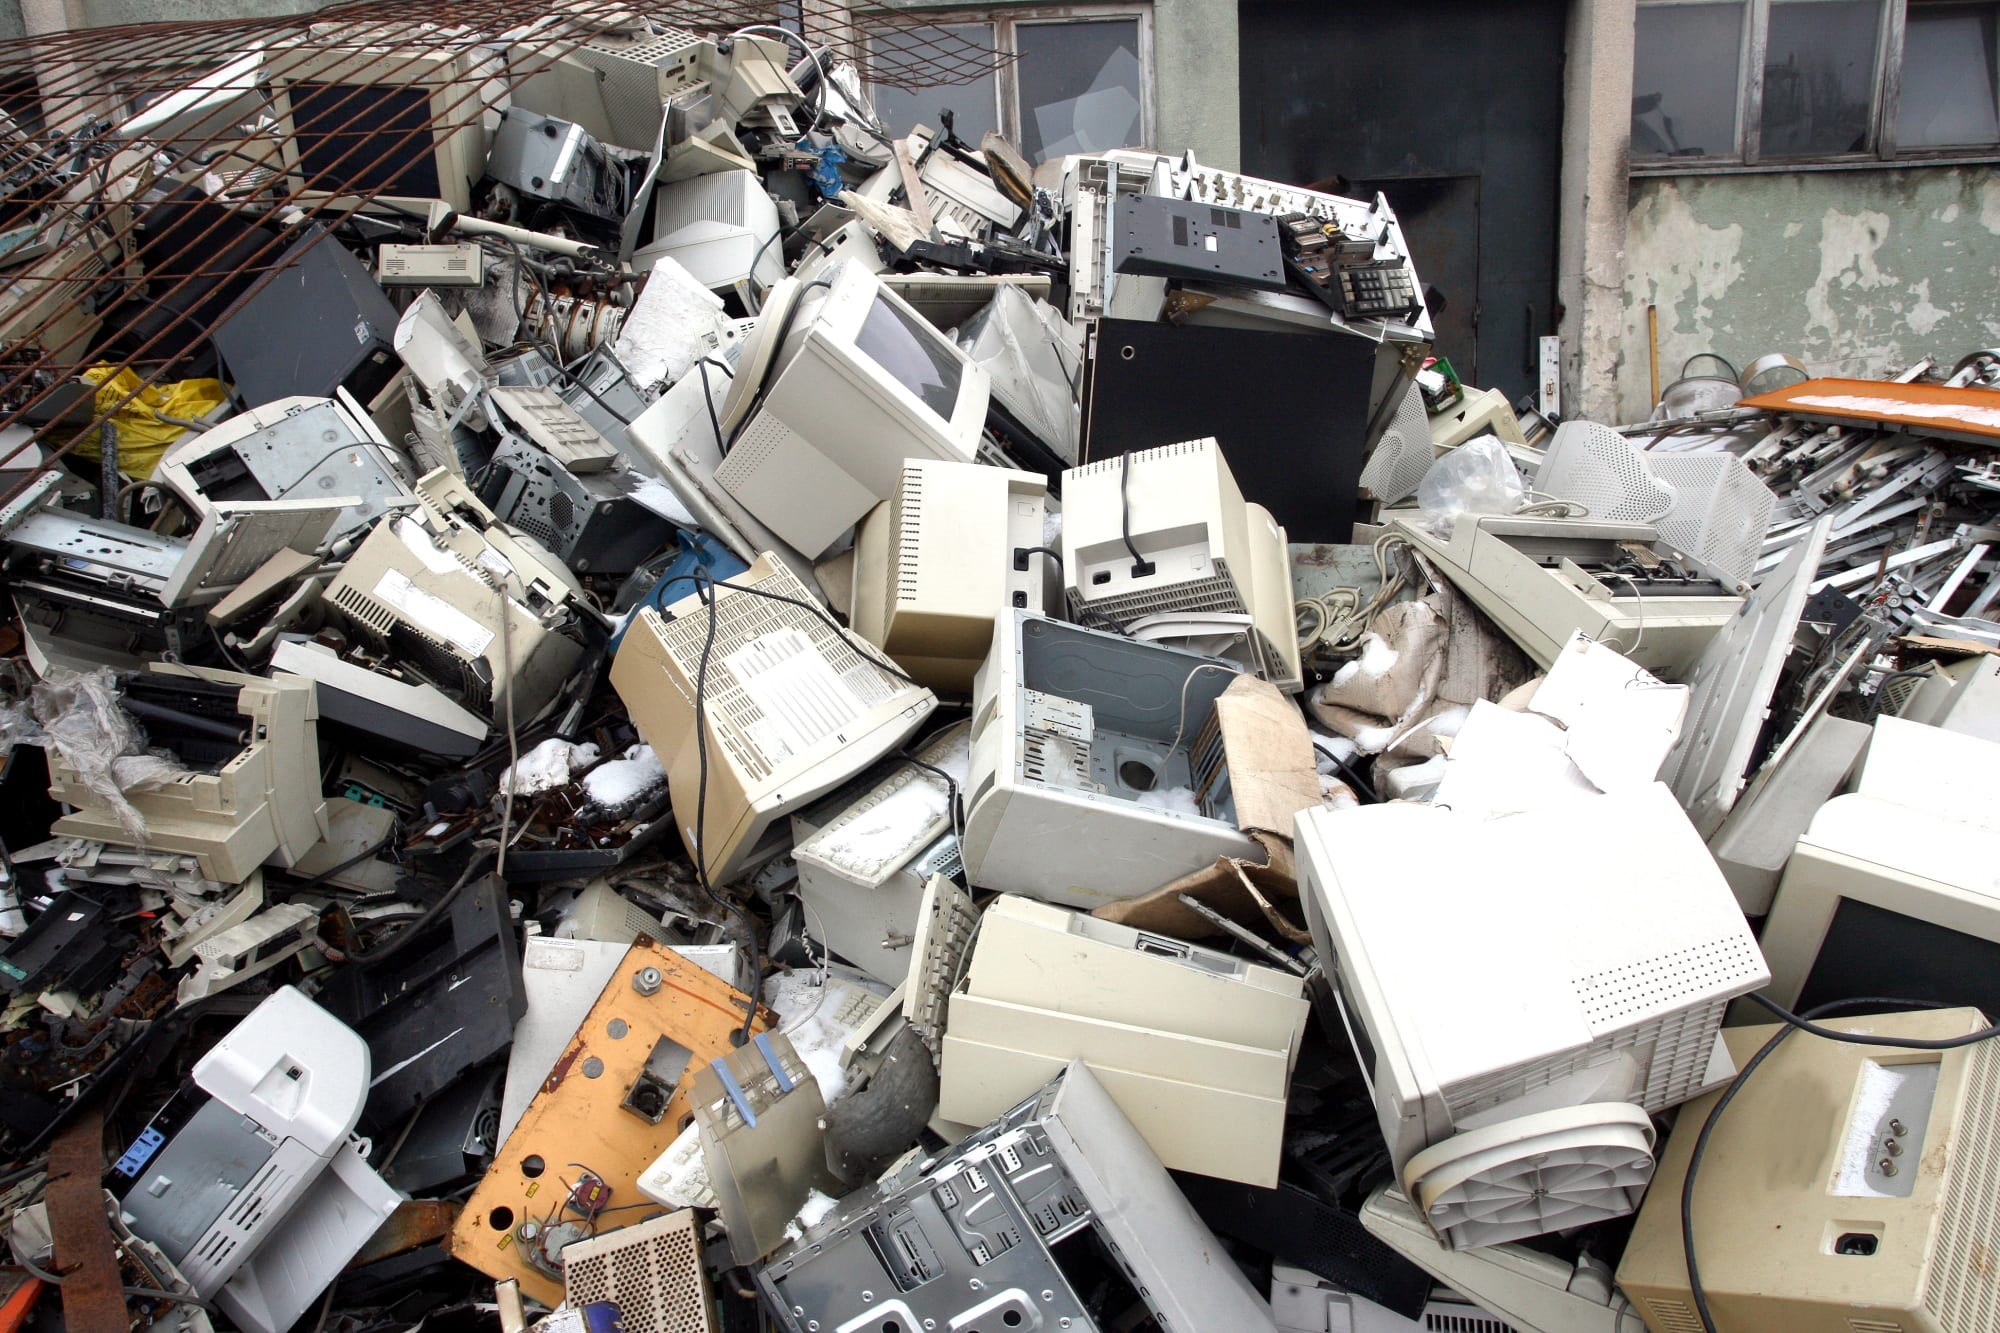 computer parts for electronic recycling | DeviceDaily.com